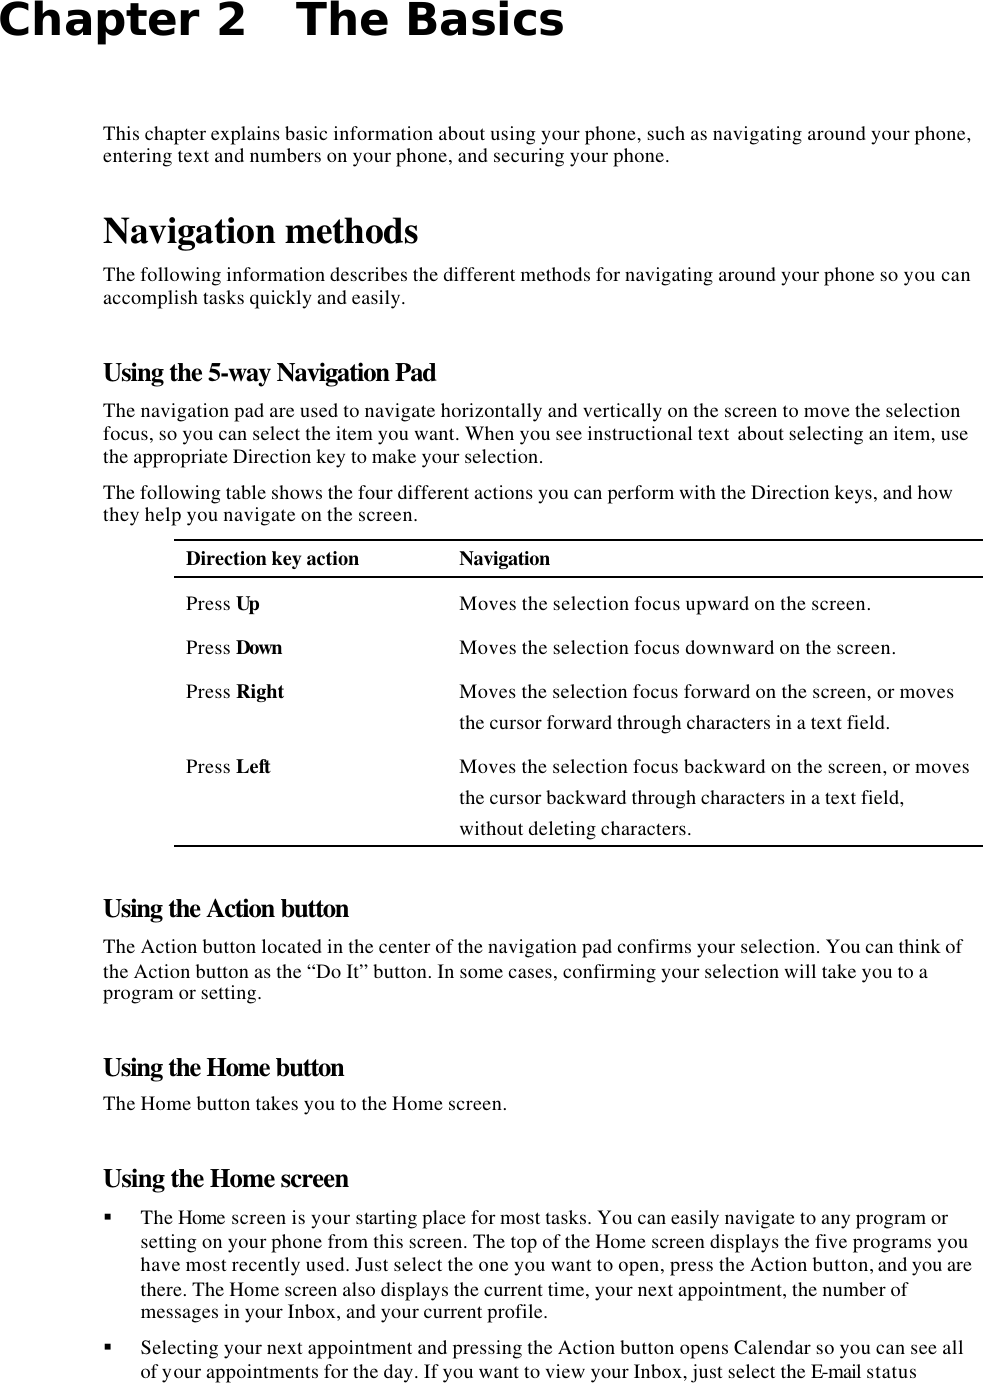 Chapter 2   The Basics This chapter explains basic information about using your phone, such as navigating around your phone, entering text and numbers on your phone, and securing your phone. Navigation methods The following information describes the different methods for navigating around your phone so you can accomplish tasks quickly and easily. Using the 5-way Navigation Pad The navigation pad are used to navigate horizontally and vertically on the screen to move the selection focus, so you can select the item you want. When you see instructional text  about selecting an item, use the appropriate Direction key to make your selection. The following table shows the four different actions you can perform with the Direction keys, and how they help you navigate on the screen. Direction key action Navigation Press Up Moves the selection focus upward on the screen. Press Down Moves the selection focus downward on the screen. Press Right Moves the selection focus forward on the screen, or moves the cursor forward through characters in a text field. Press Left Moves the selection focus backward on the screen, or moves the cursor backward through characters in a text field, without deleting characters. Using the Action button The Action button located in the center of the navigation pad confirms your selection. You can think of the Action button as the “Do It” button. In some cases, confirming your selection will take you to a program or setting. Using the Home button The Home button takes you to the Home screen. Using the Home screen § The Home screen is your starting place for most tasks. You can easily navigate to any program or setting on your phone from this screen. The top of the Home screen displays the five programs you have most recently used. Just select the one you want to open, press the Action button, and you are there. The Home screen also displays the current time, your next appointment, the number of messages in your Inbox, and your current profile. § Selecting your next appointment and pressing the Action button opens Calendar so you can see all of your appointments for the day. If you want to view your Inbox, just select the E-mail status 